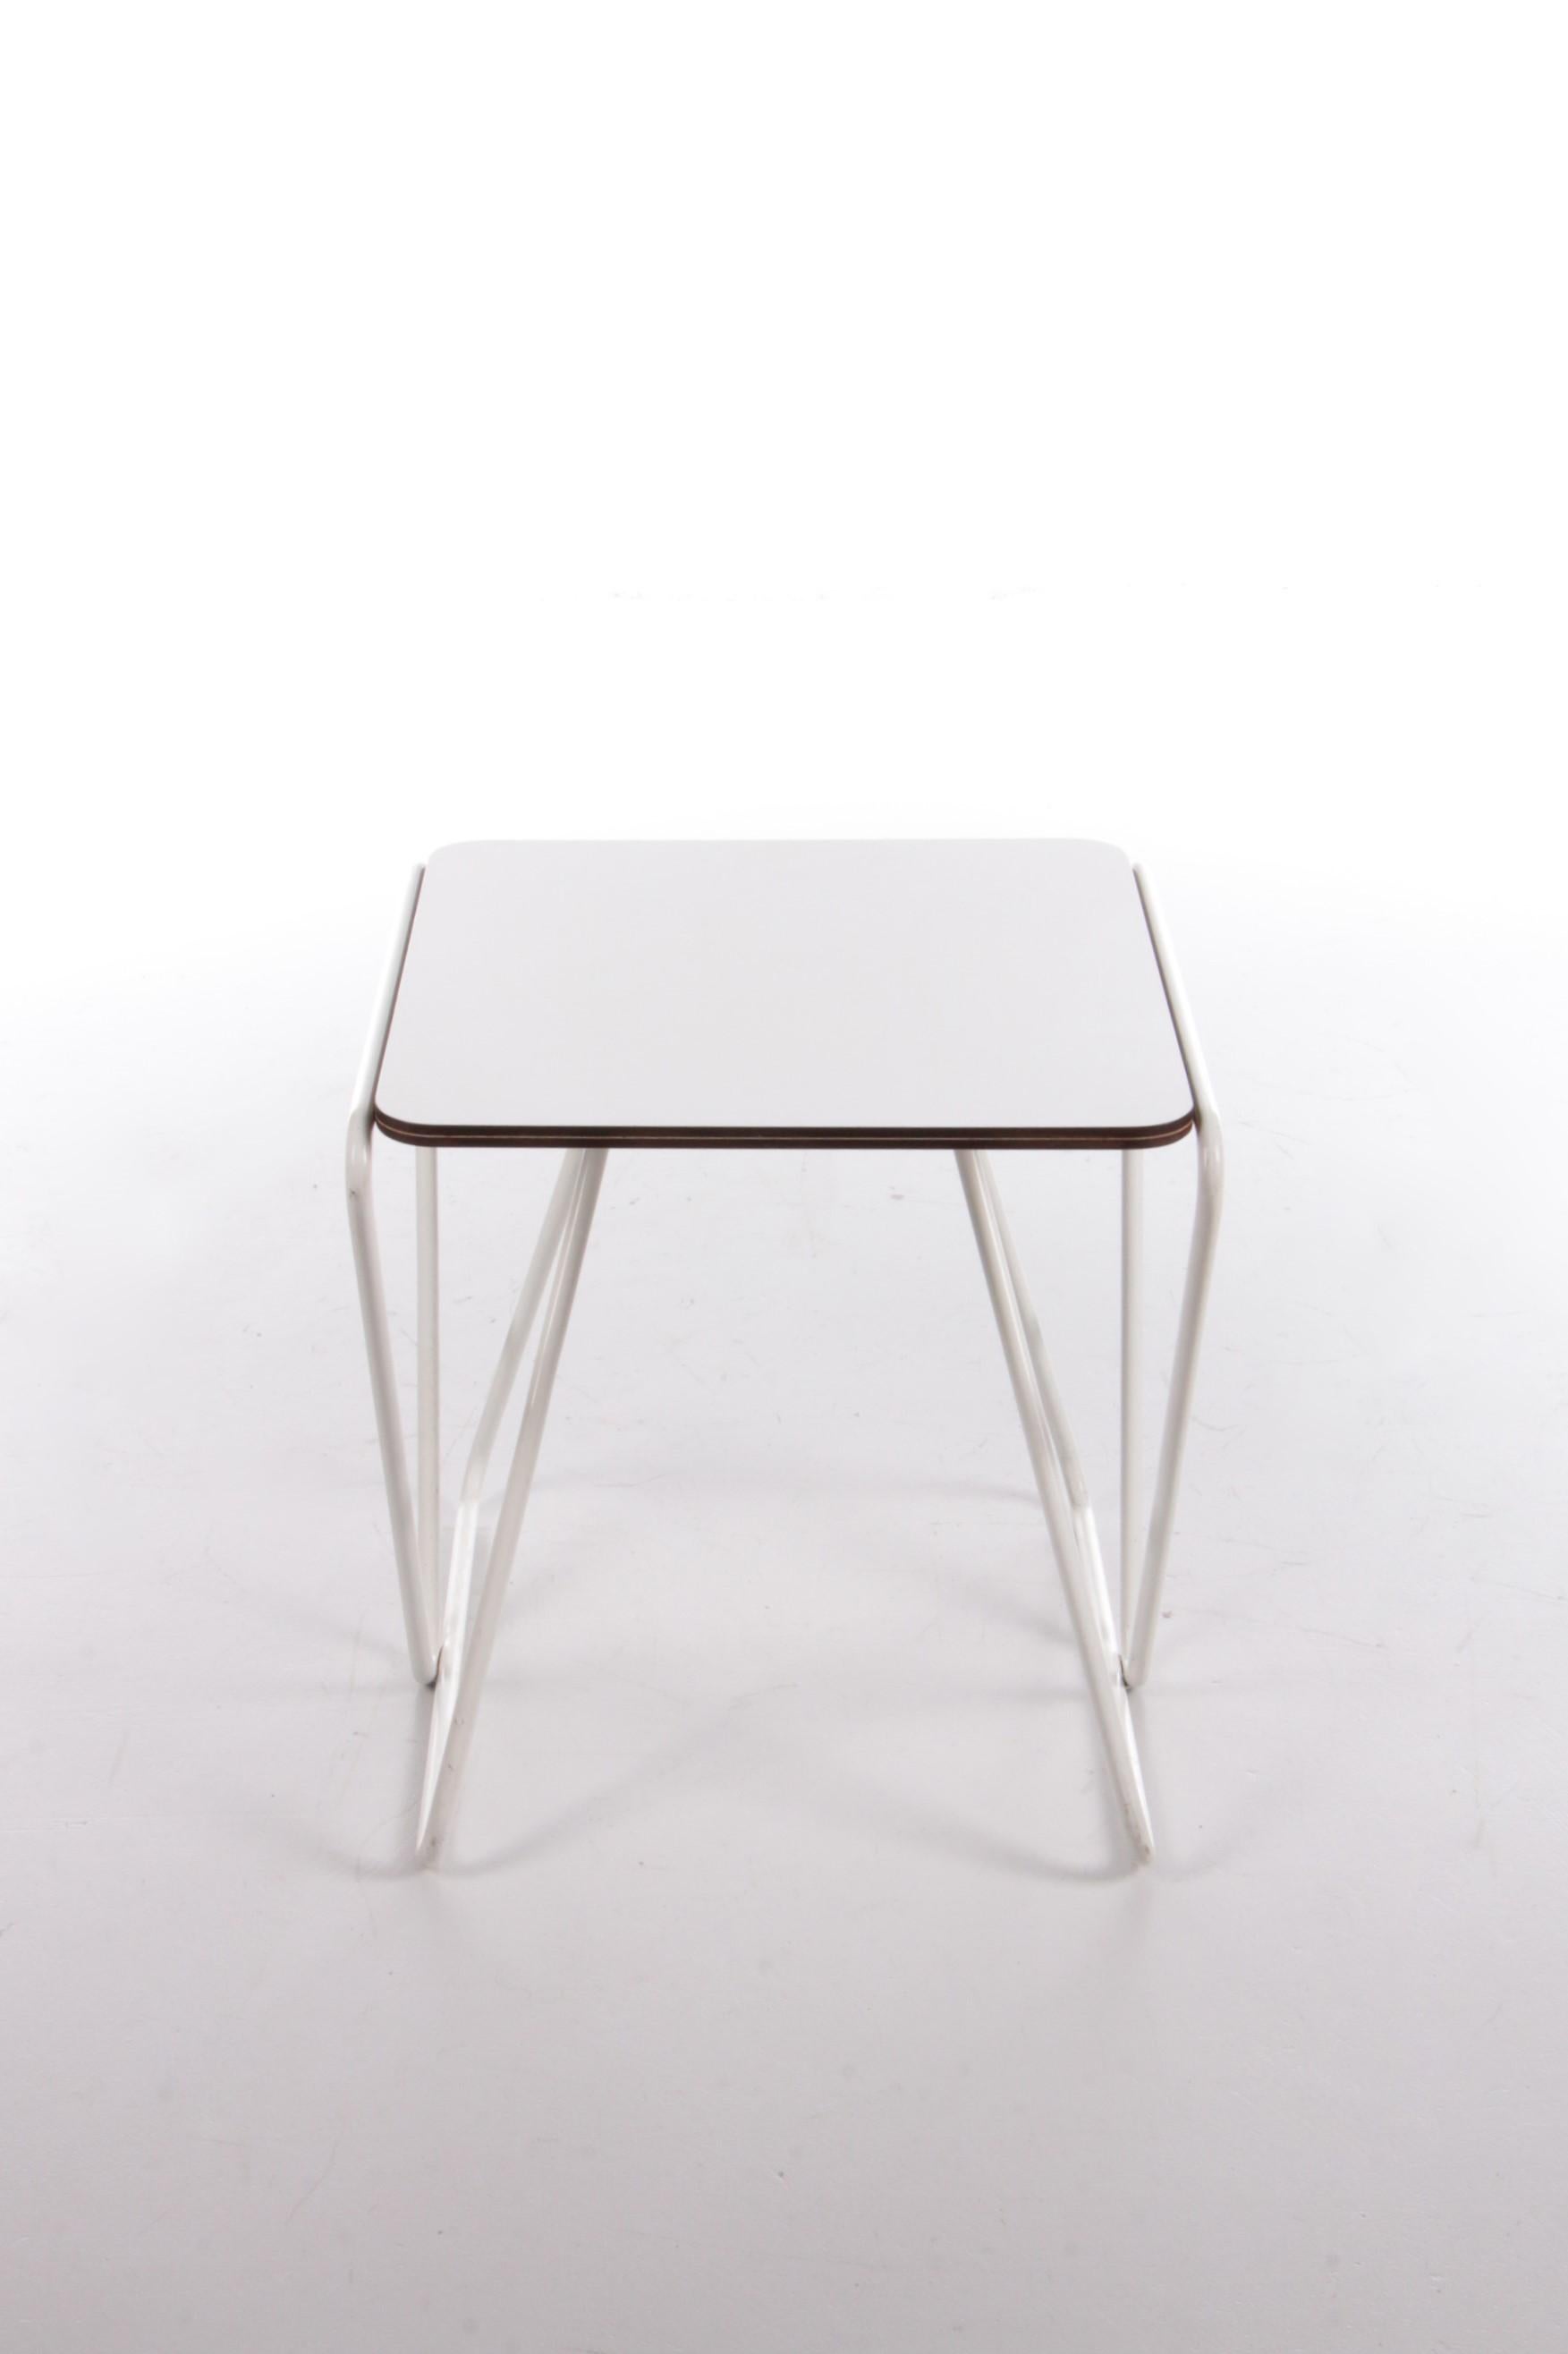 Metal Walter Antonis Side Table for I-Form Holland, 1978 For Sale